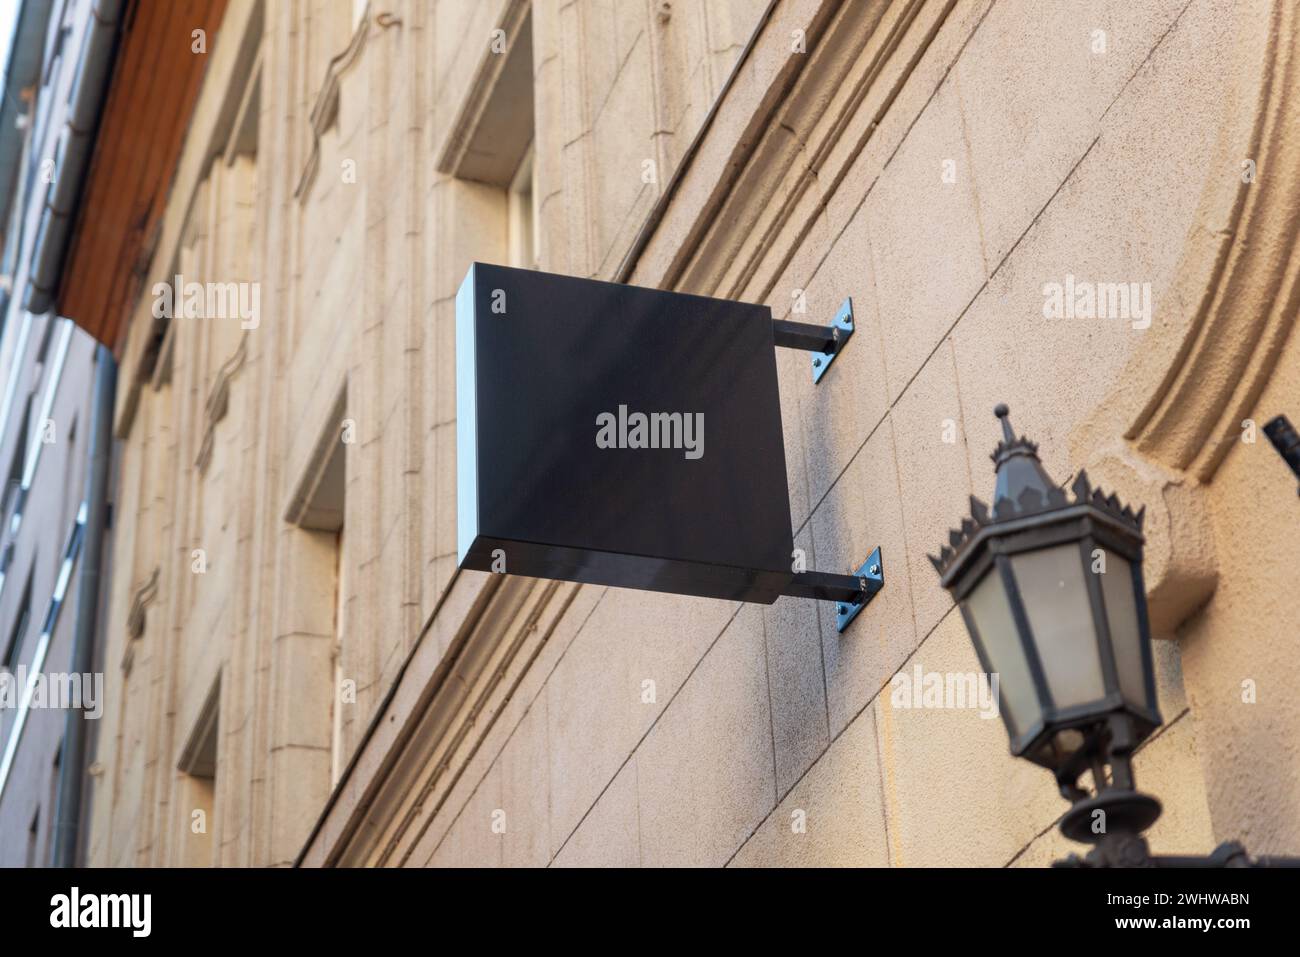 Small clean square sign for a company logo on the wall of an office building Stock Photo